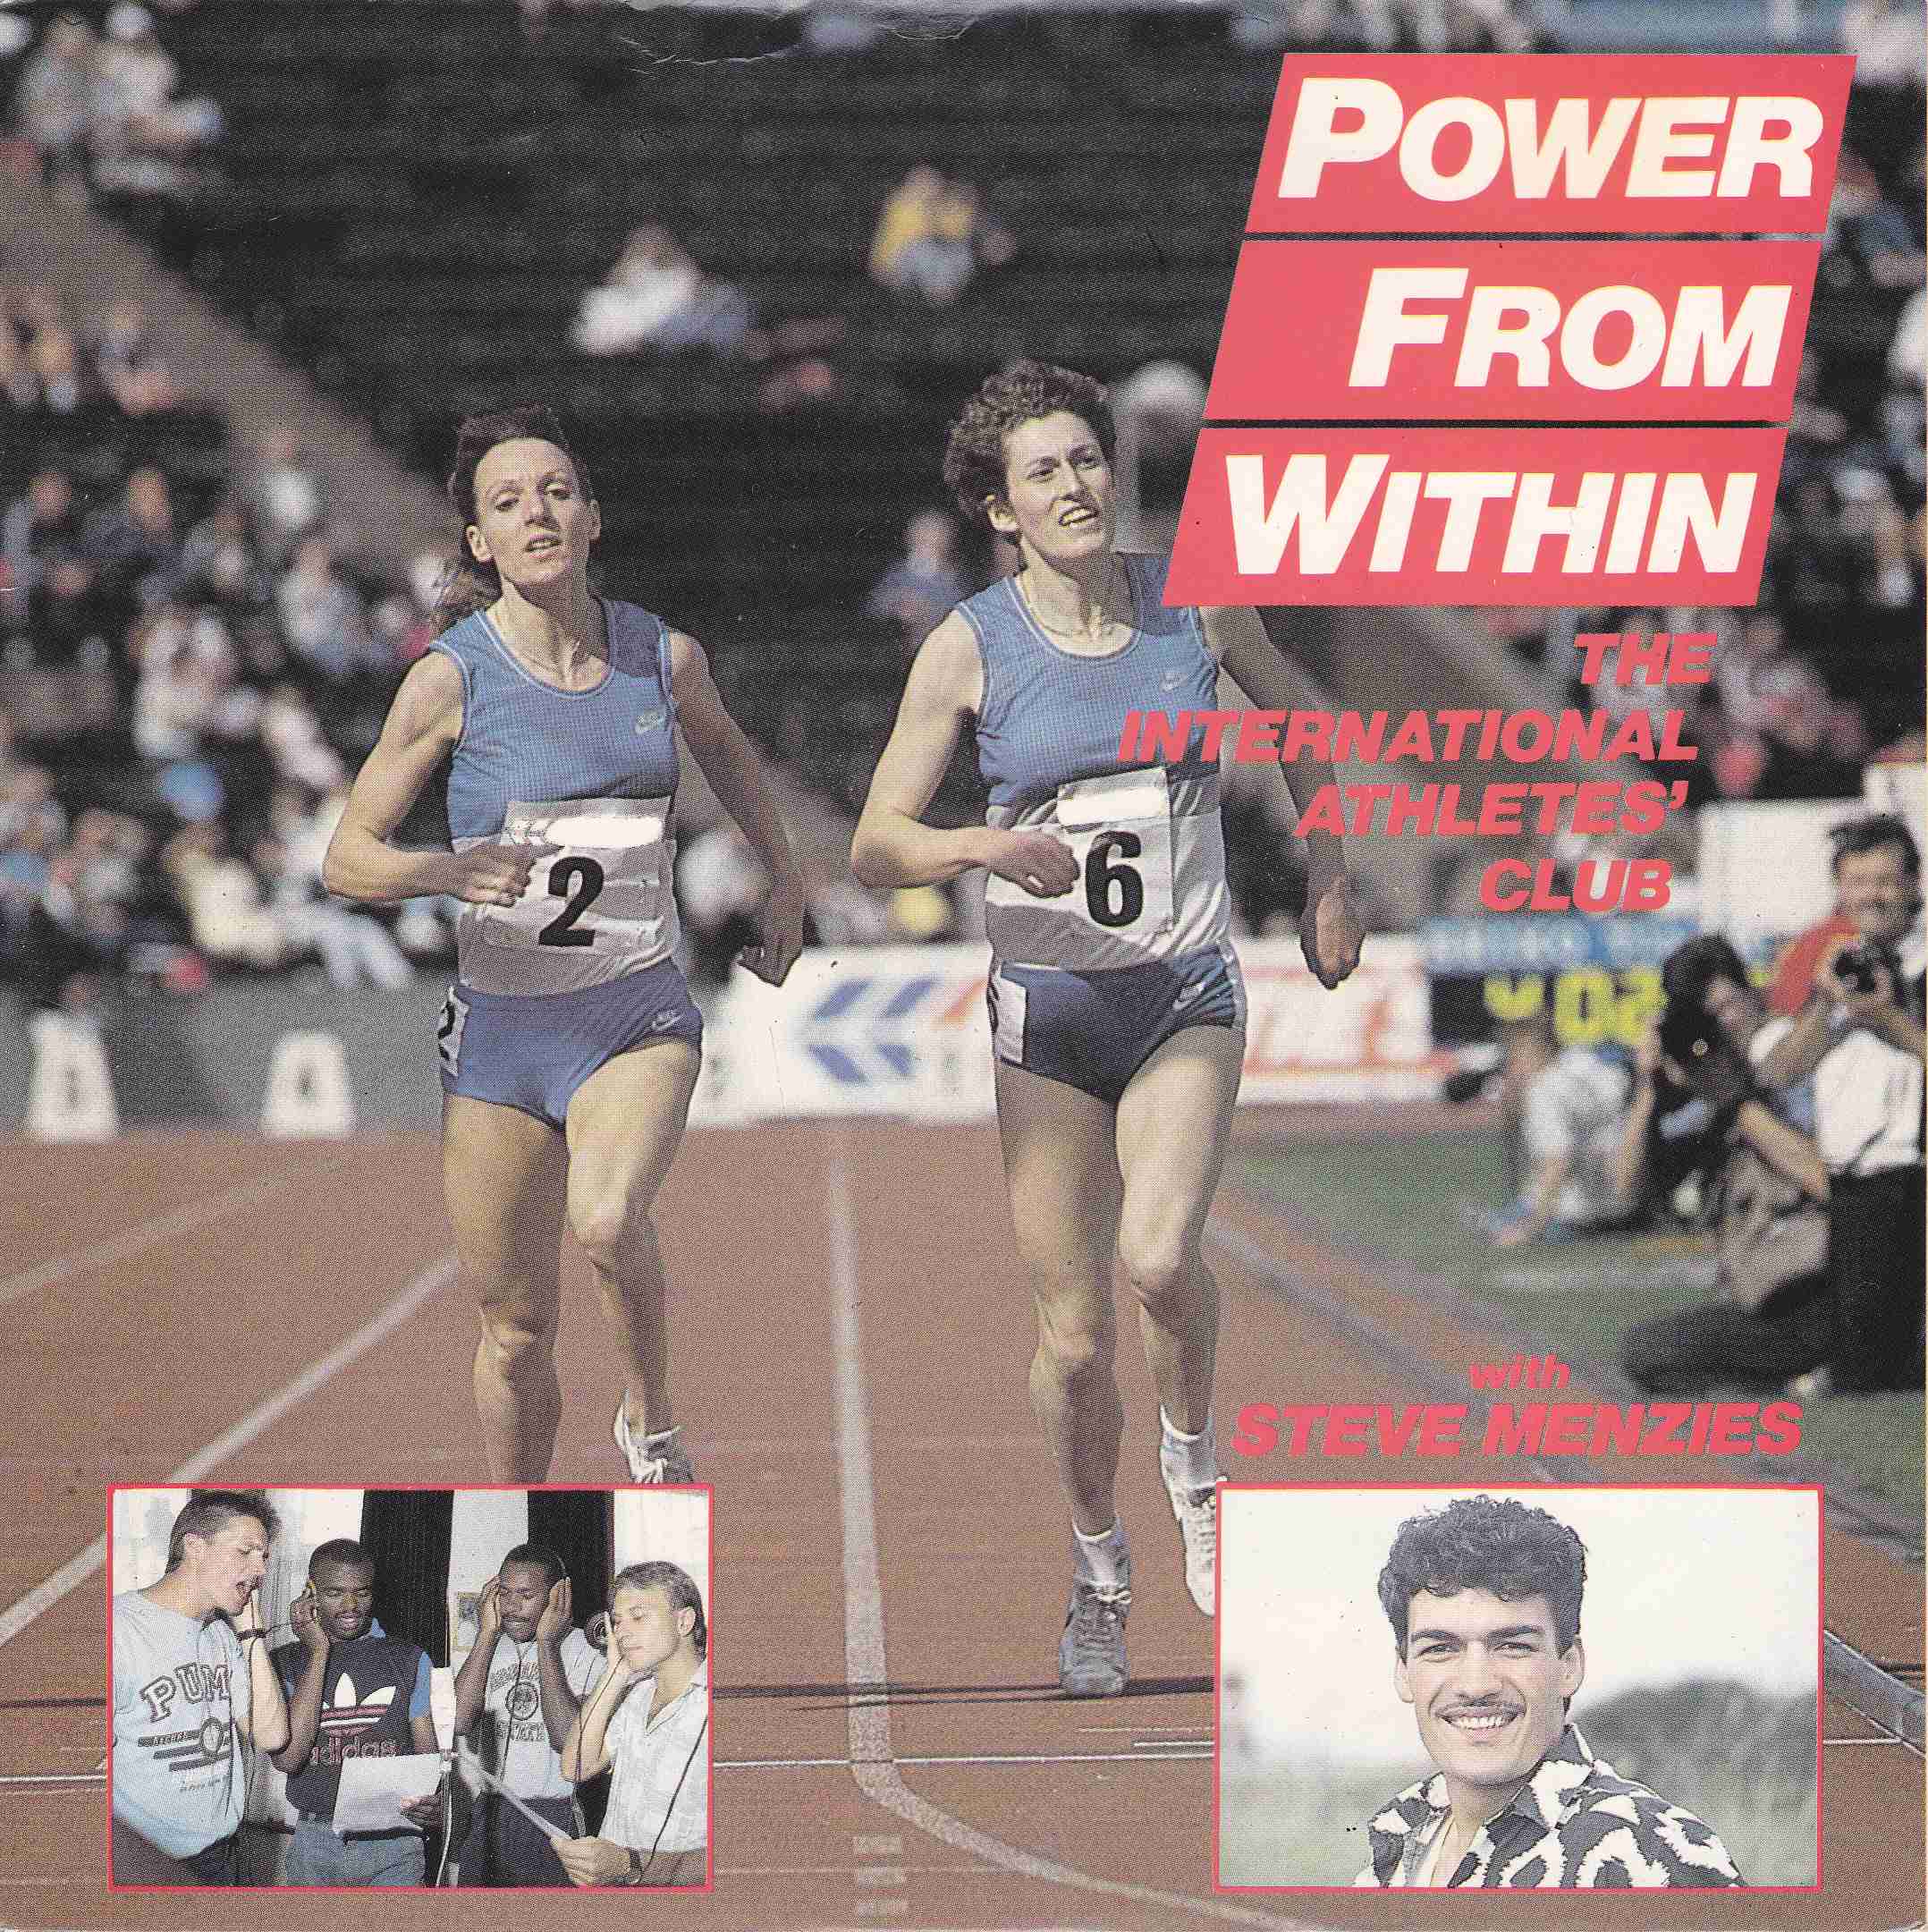 Picture of Power from within by artist The International Athletes' Club With Steve Menzies from the BBC 12inches - Records and Tapes library